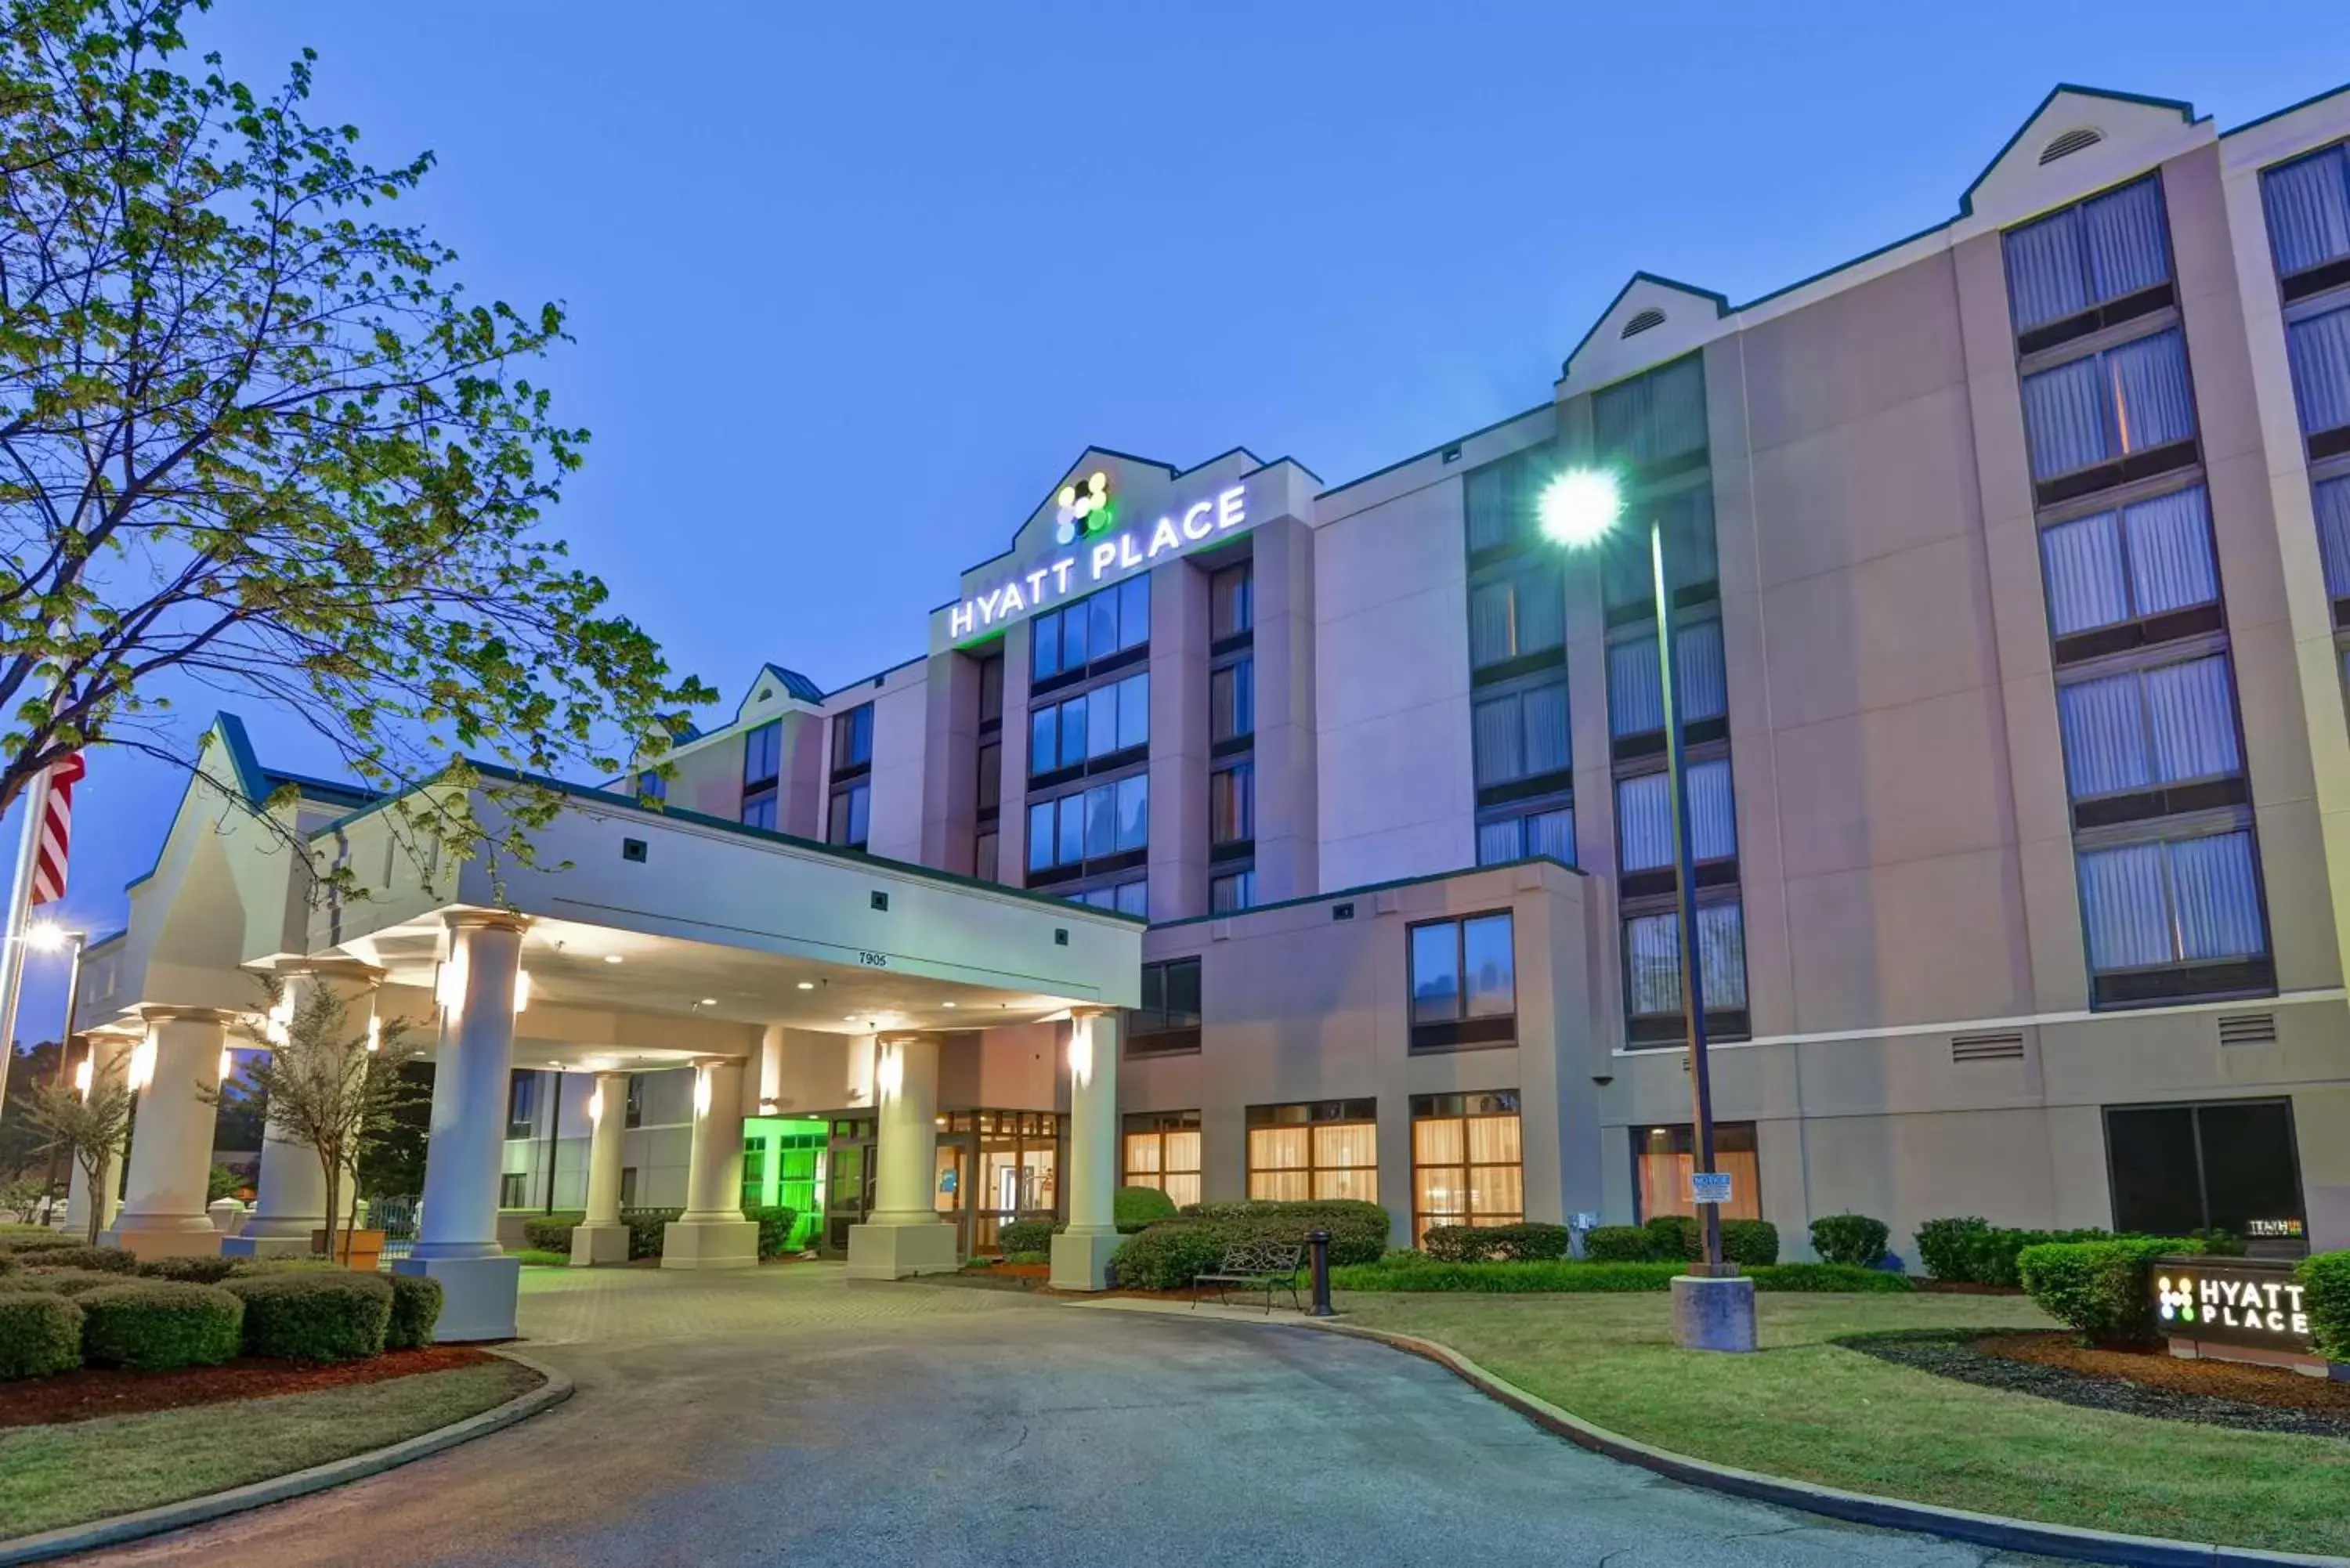 Property Building in Hyatt Place Memphis Wolfchase